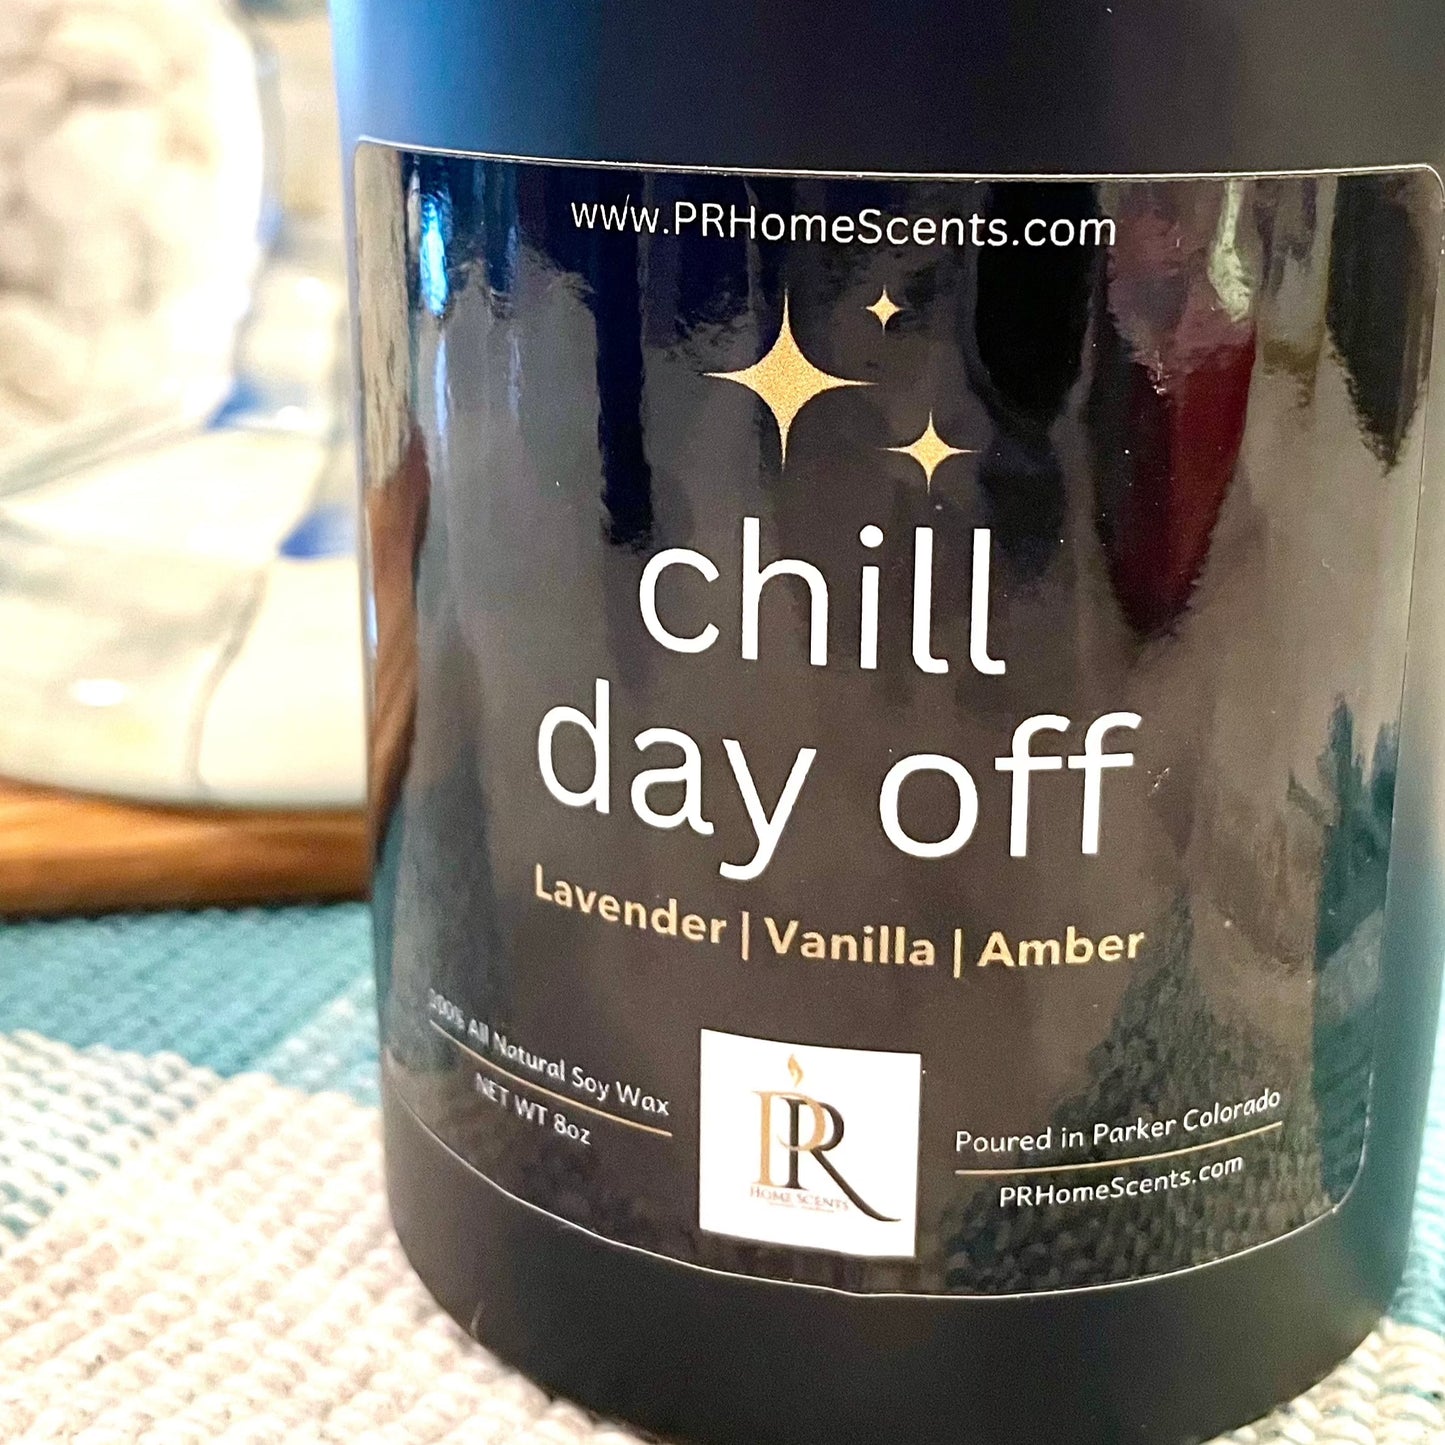 Indulge in serenity with Chill Day Off candles, available in 8oz and 3.5oz sizes. Infused with the calming blend of Lavender Vanilla and Amber, these candles create a tranquil atmosphere, perfect for unwinding after a long day. Embrace relaxation with the soothing fragrance of Chill Day Off.